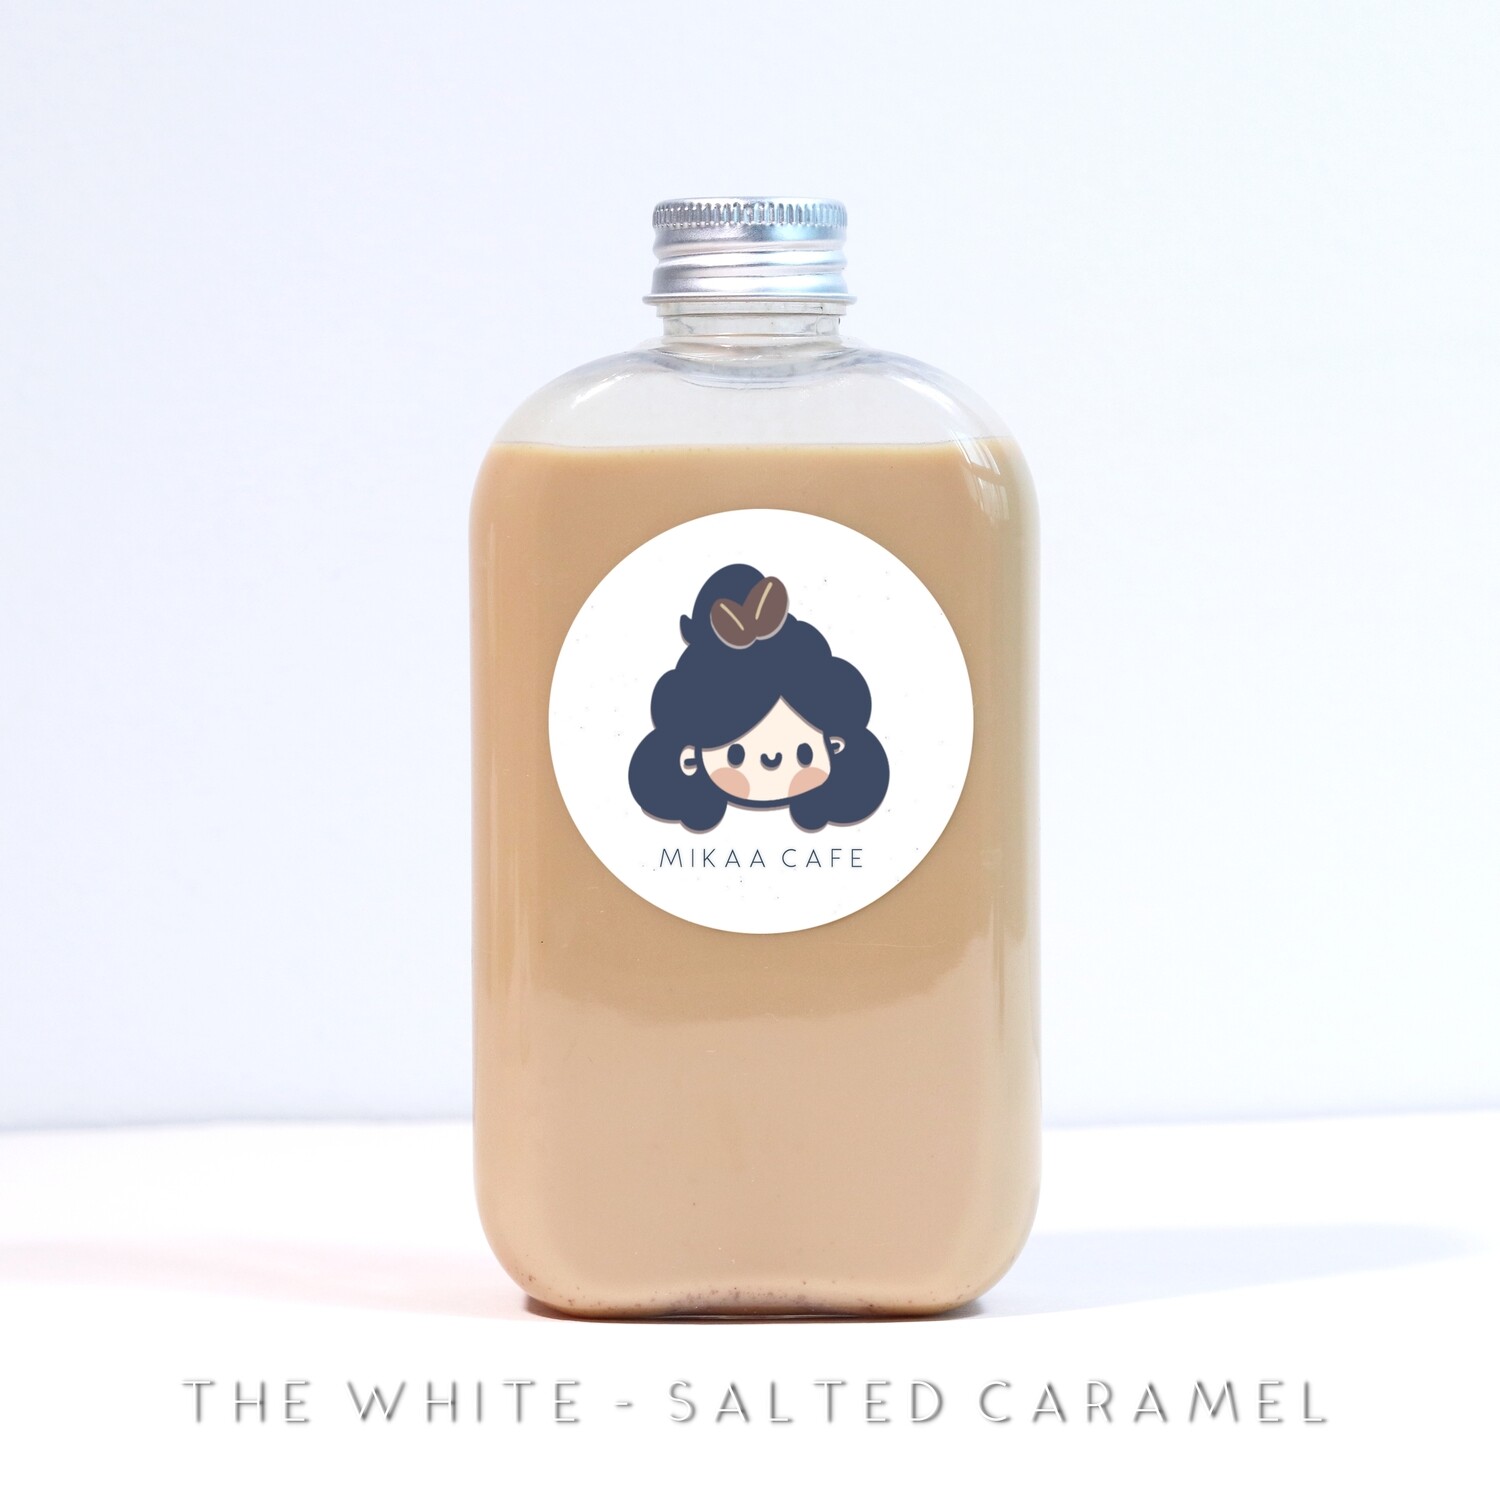 The White - Salted Caramel